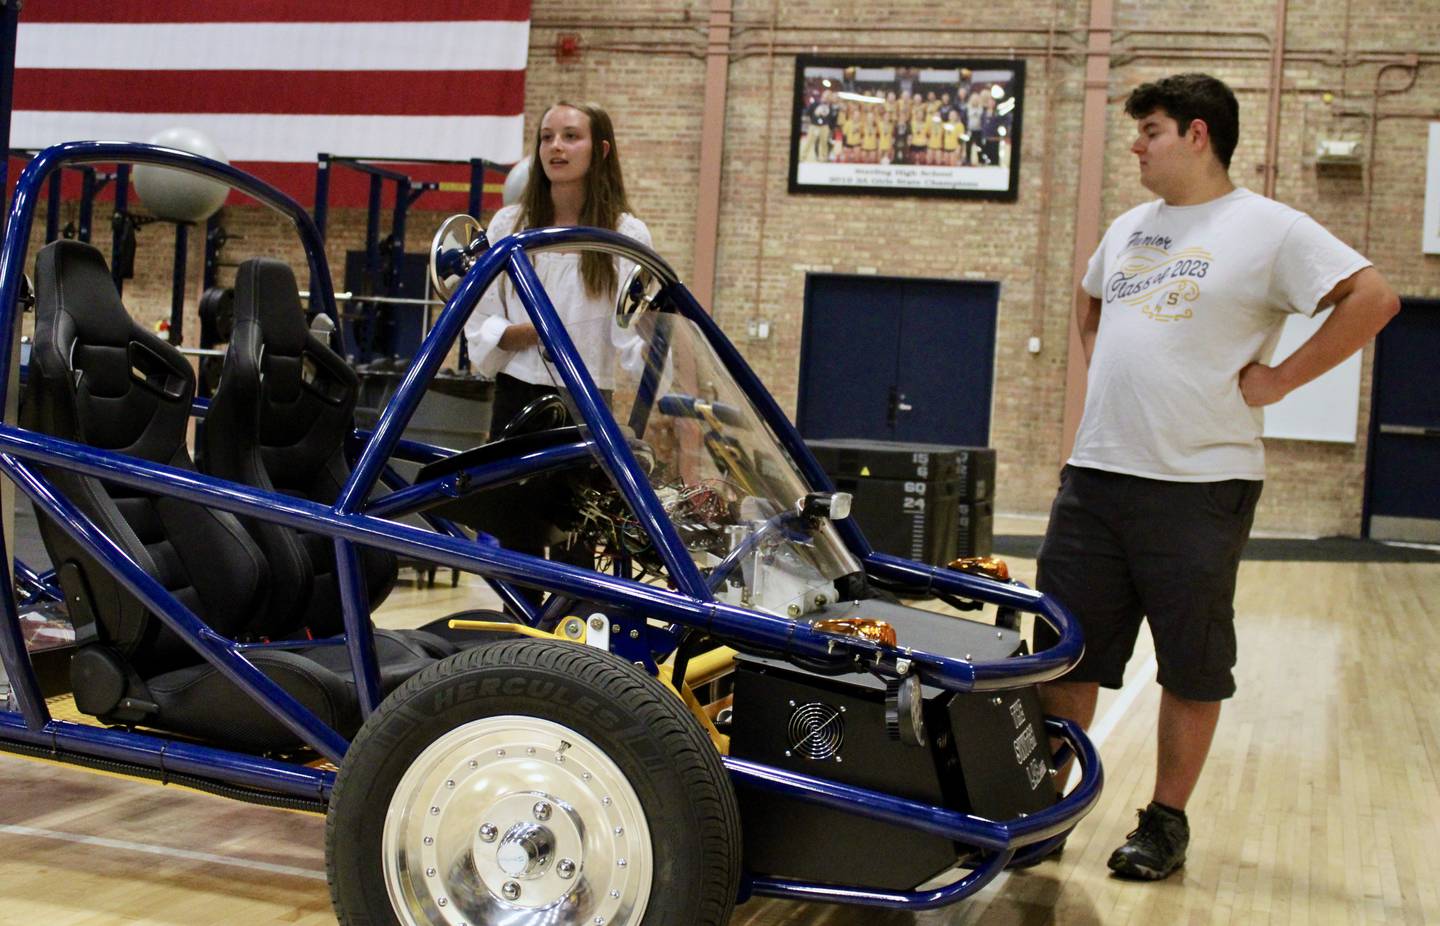 Paige Geil and Zach Shapiro, two members of a Sterling High School physics class whose project was to assemble an electric vehicle, talk about their experiences during a demonstration on Wednesday for the Sterling Public Schools board of education.